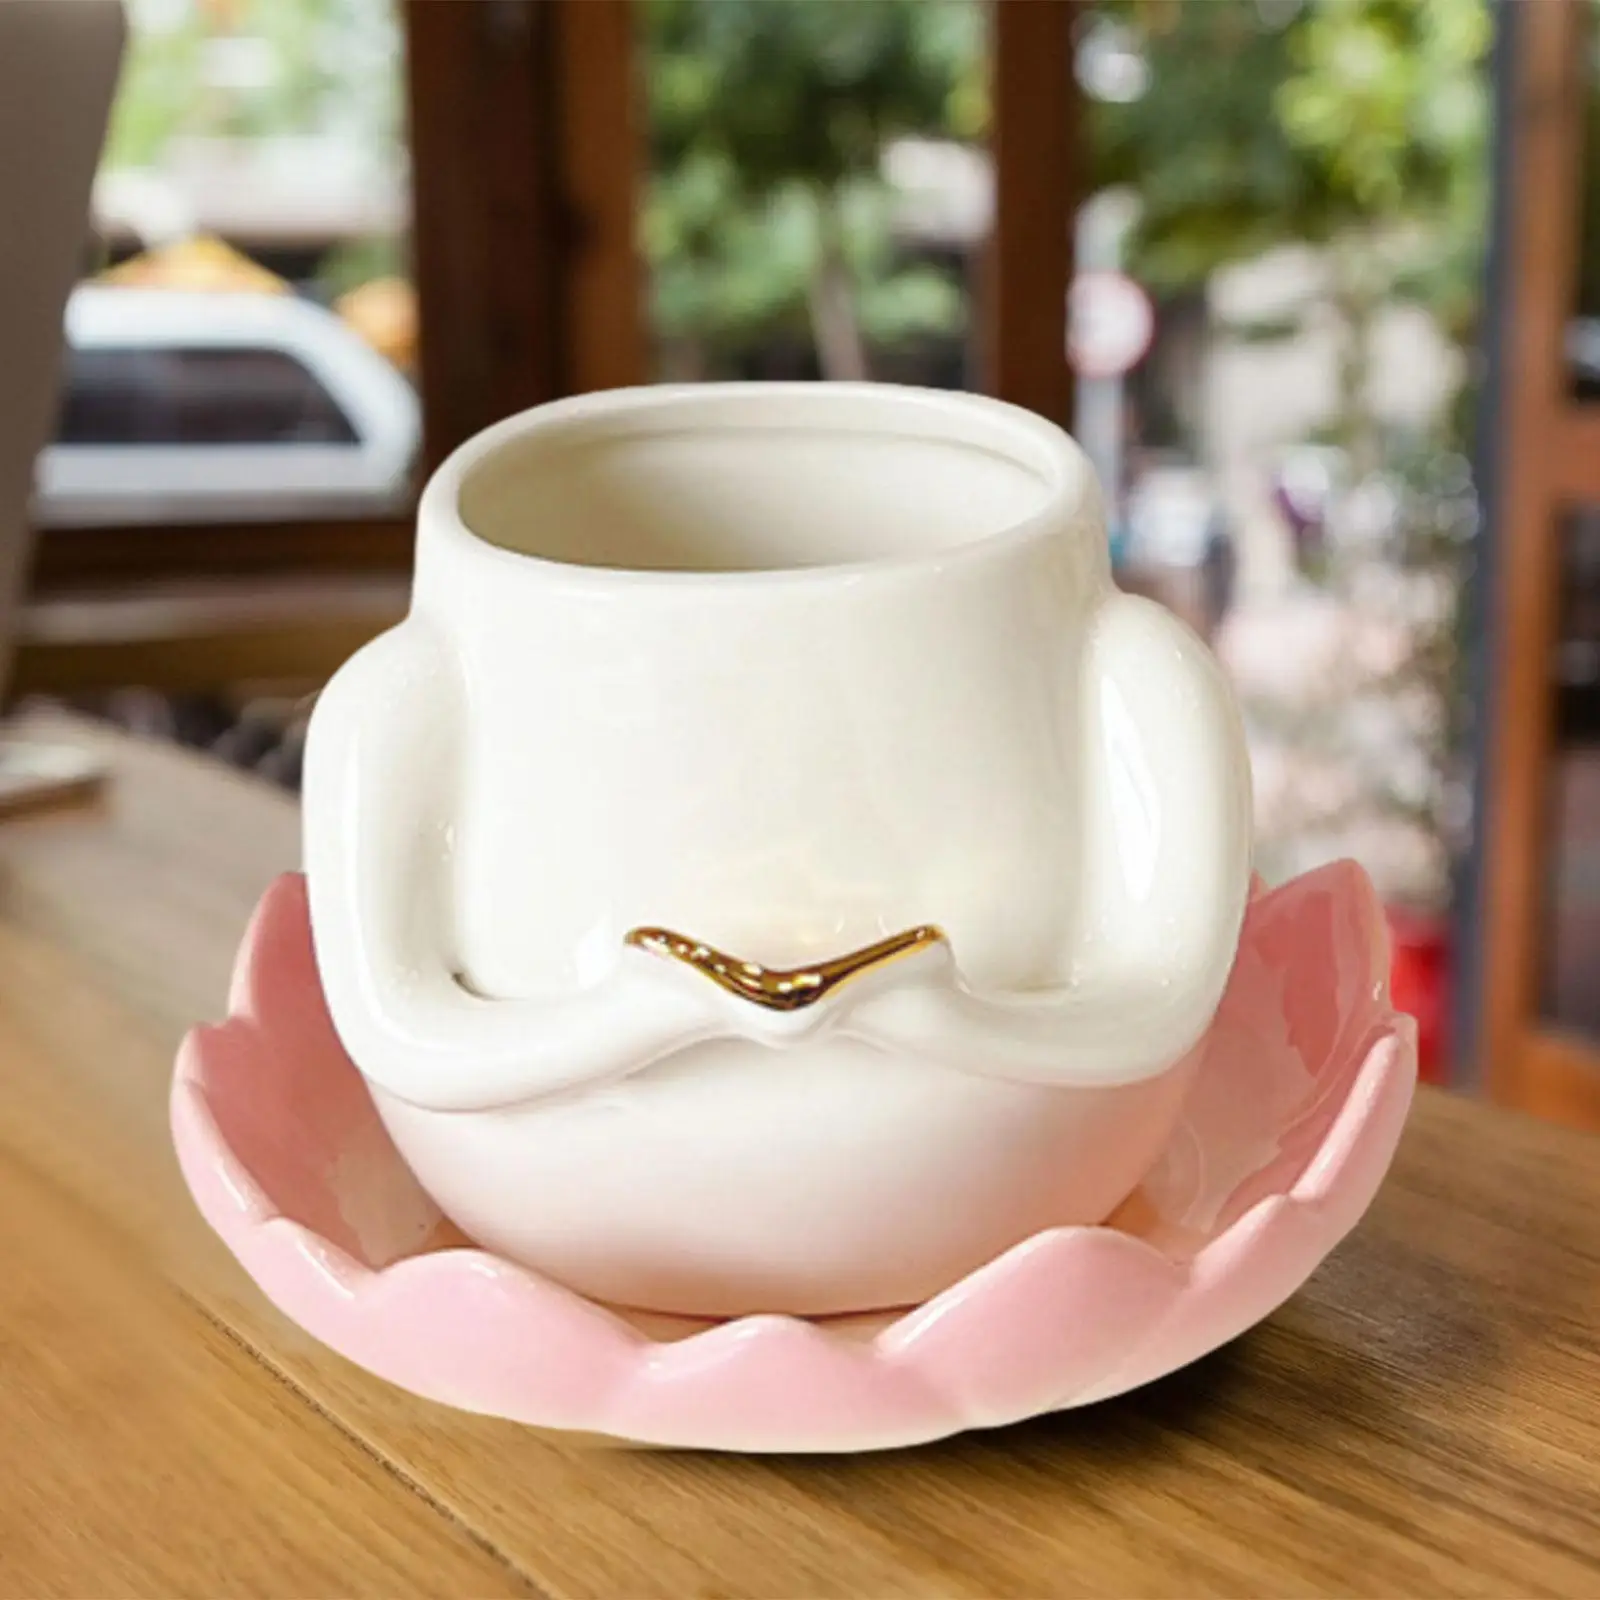 Novelty Ceramic Lotus Water Mug 13.5oz Cute Creative Cups Drinking Cup Unique Cups for Bar Home Cafe Party Housewarming Gift